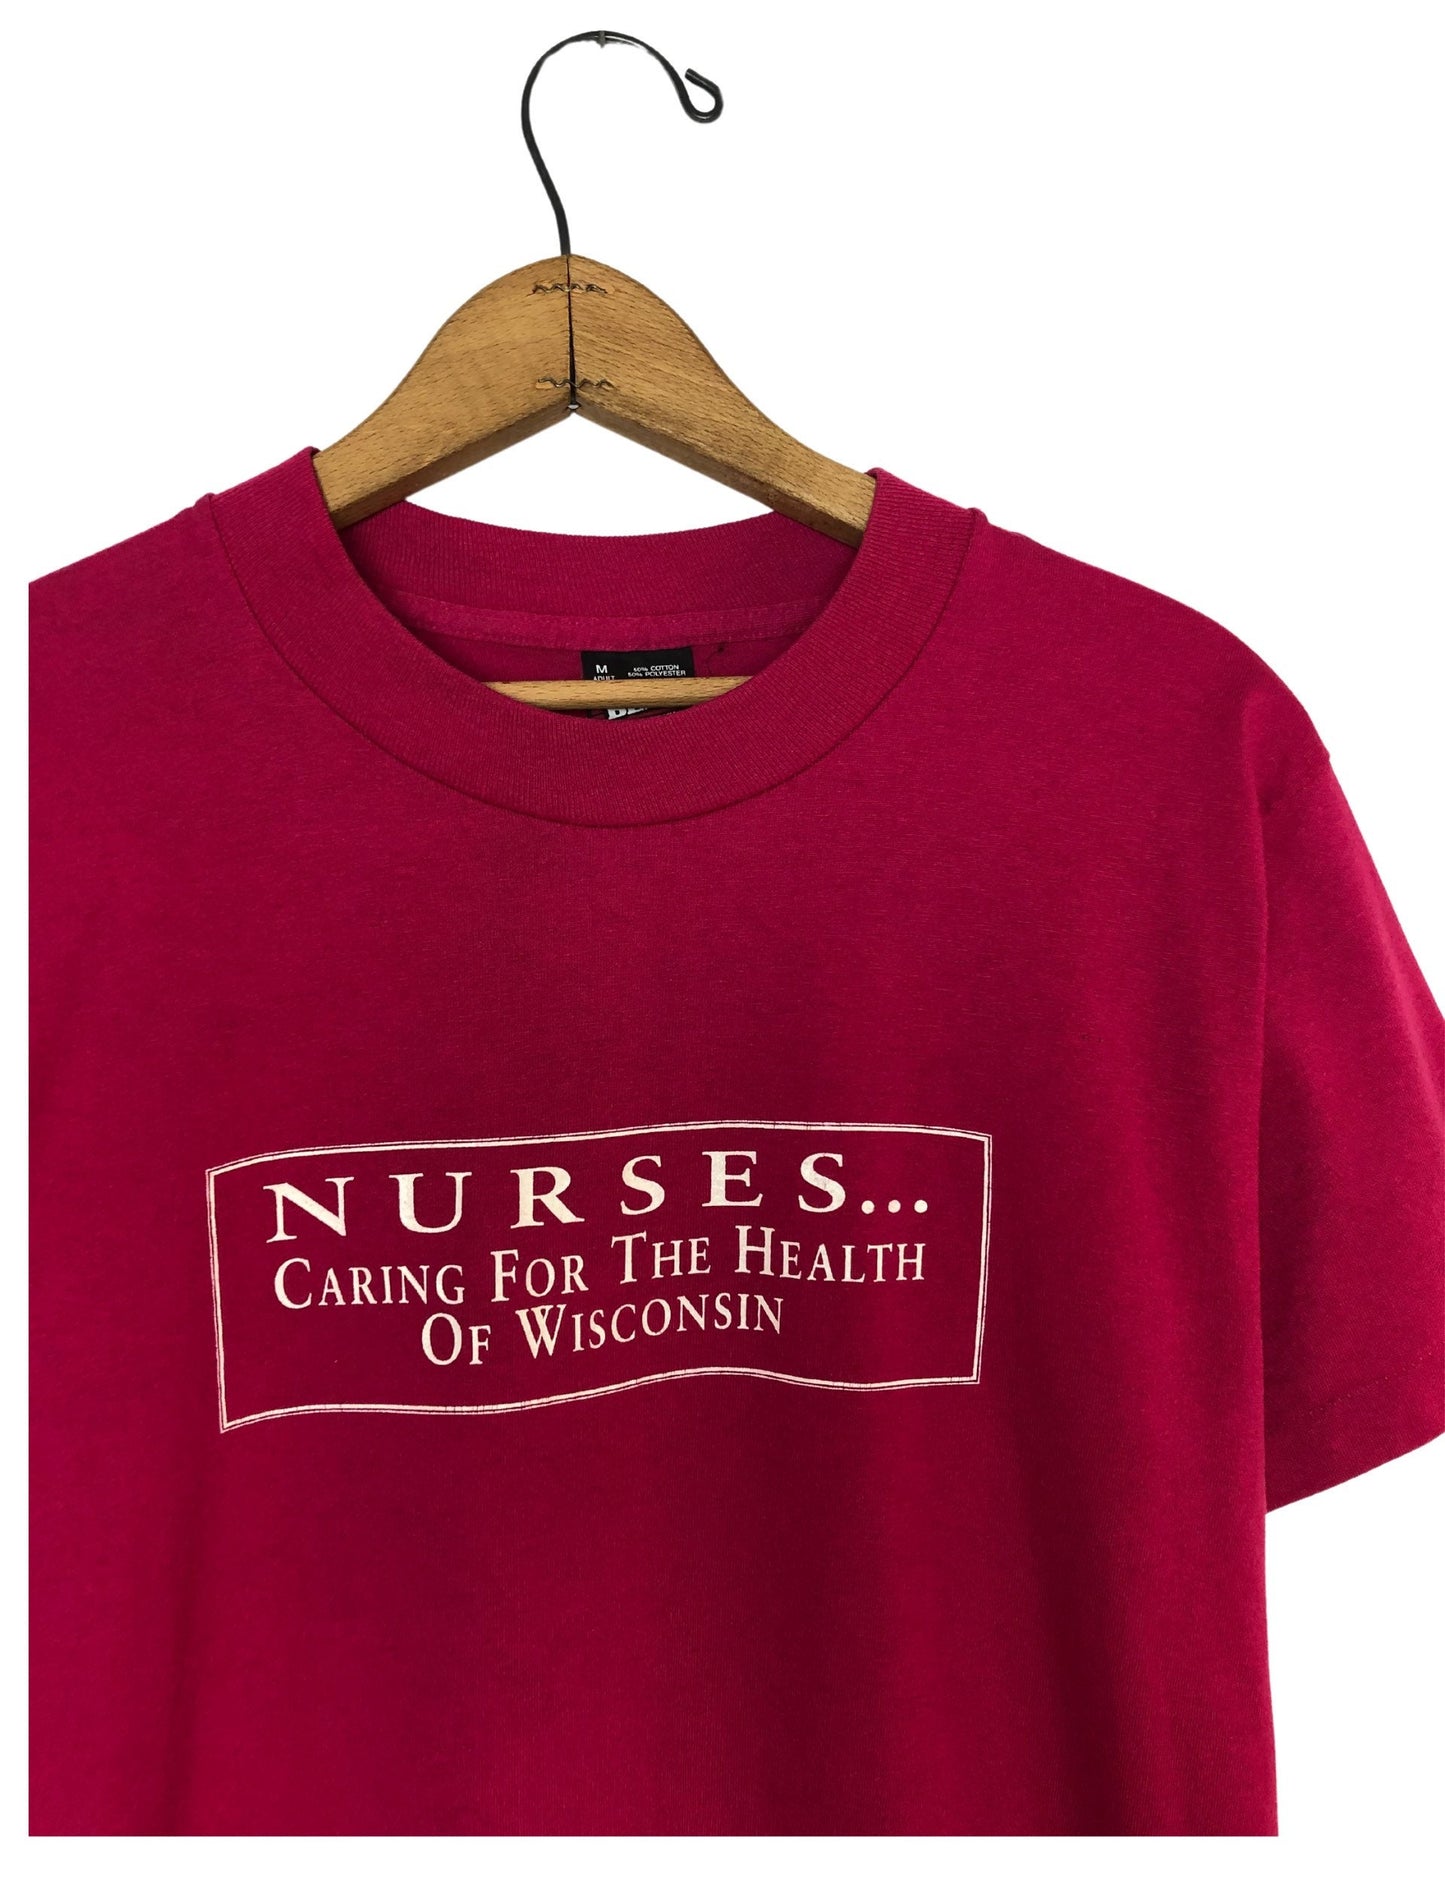 Vintage 90’s Nurses Essential Workers Wisconsin Super Soft Fruit of the Loom T-Shirt Size Medium